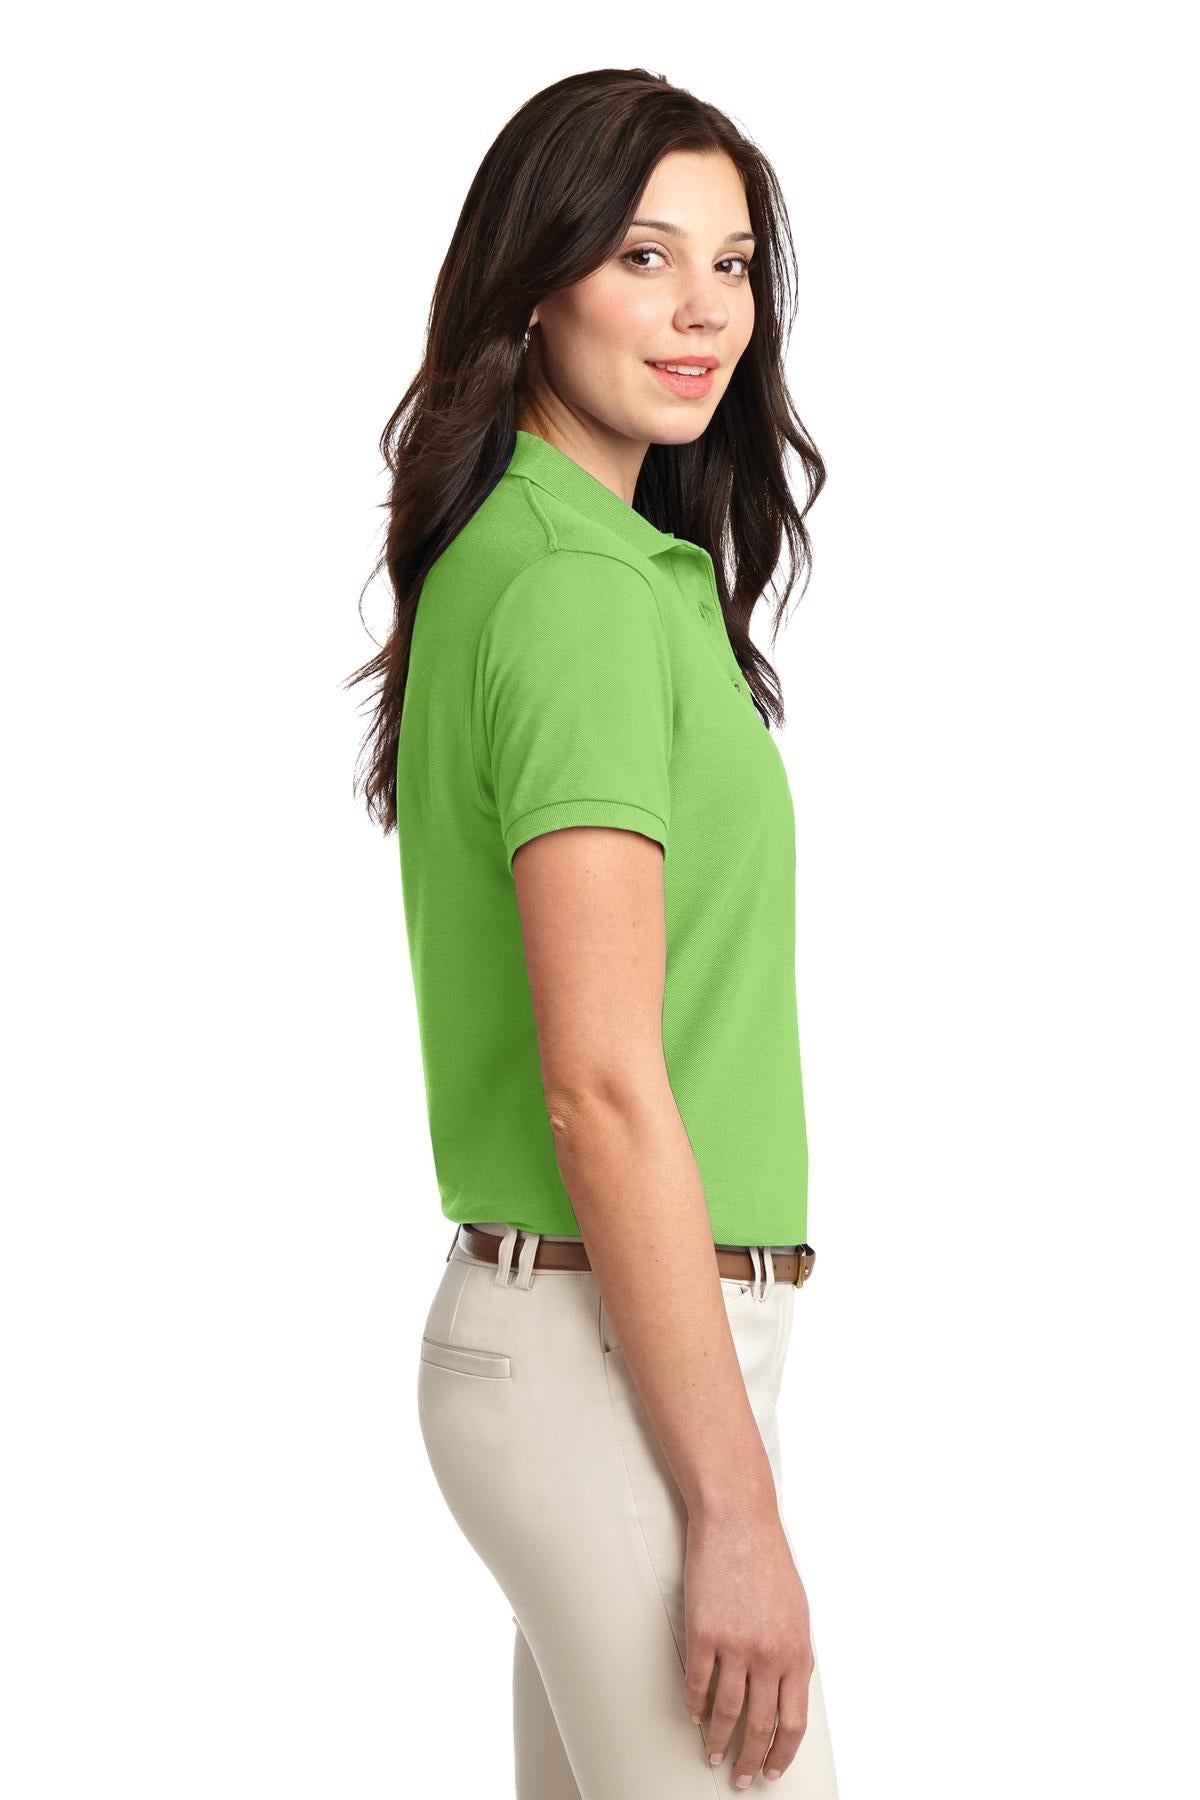 Port Authority Ladies Silk Touch - Polo L500